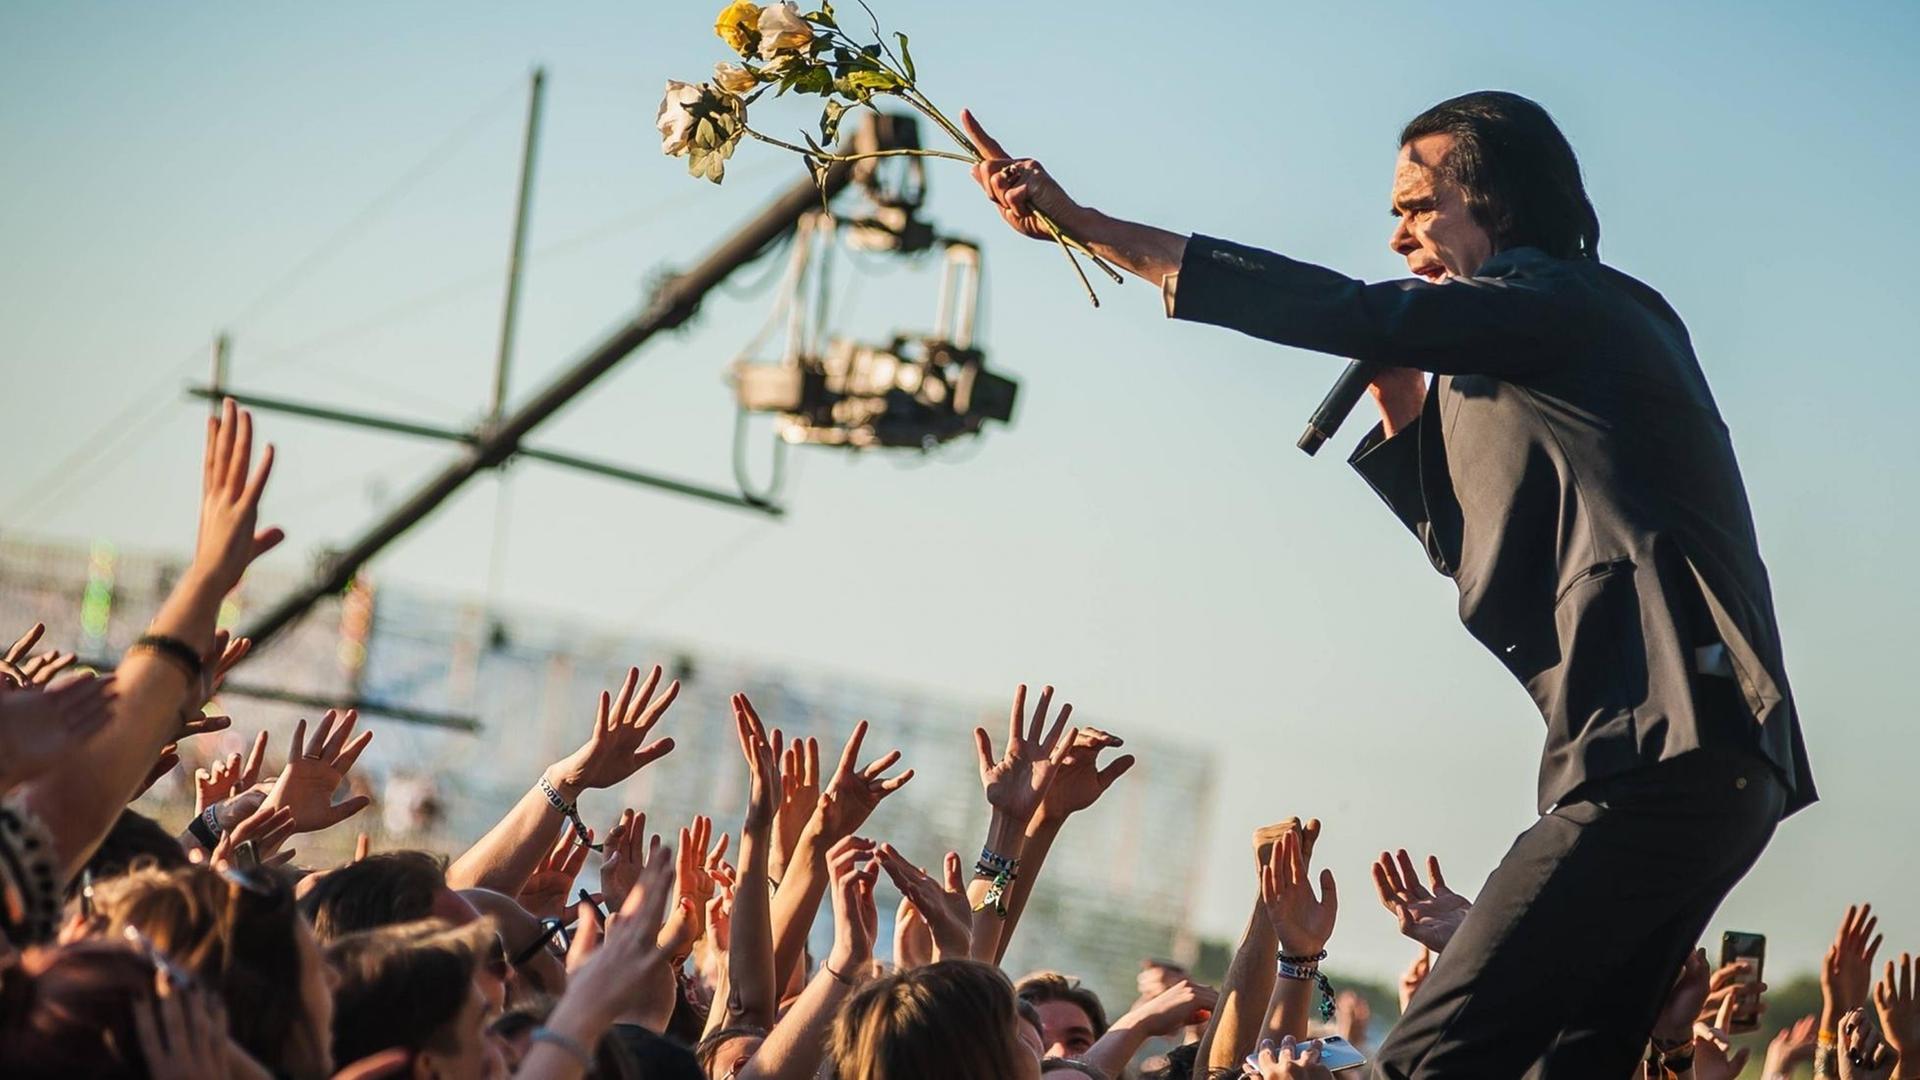 Nick Cave & The Bad Seeds perform at Open er Festival 2018 Nick Cave & The Bad Seeds perform at Open er Festival 2018 on July 04, 2018 in Gdynia, Poland. EN_01328260_0017 04.07.2018 - imago 0084288285